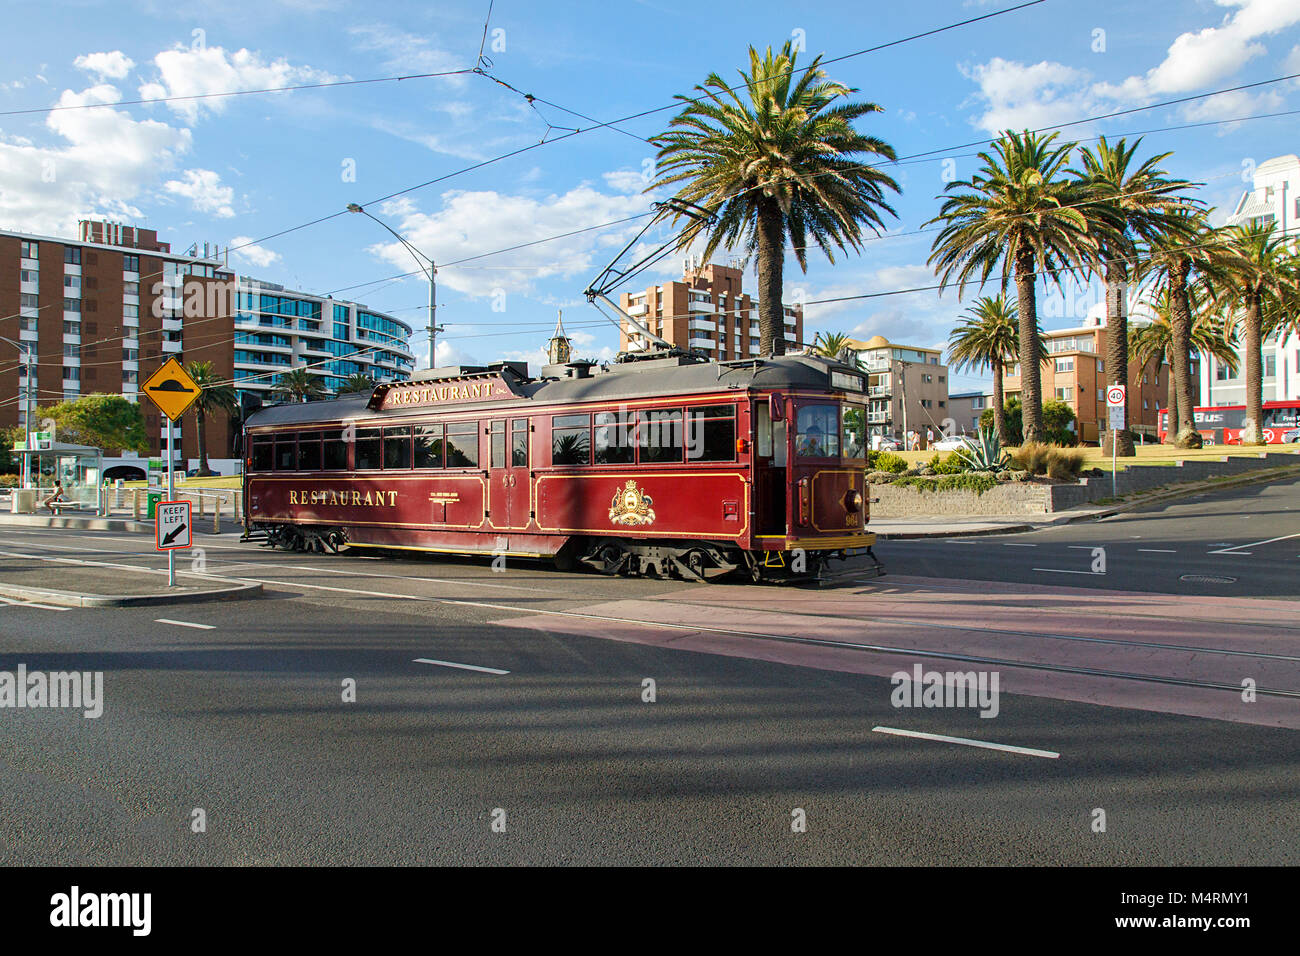 St Kilda, Melbourne, Australia: March 15, 2017: A unique tourist dining experience on a restored, moving restaurant streetcar with vintage decor. Stock Photo